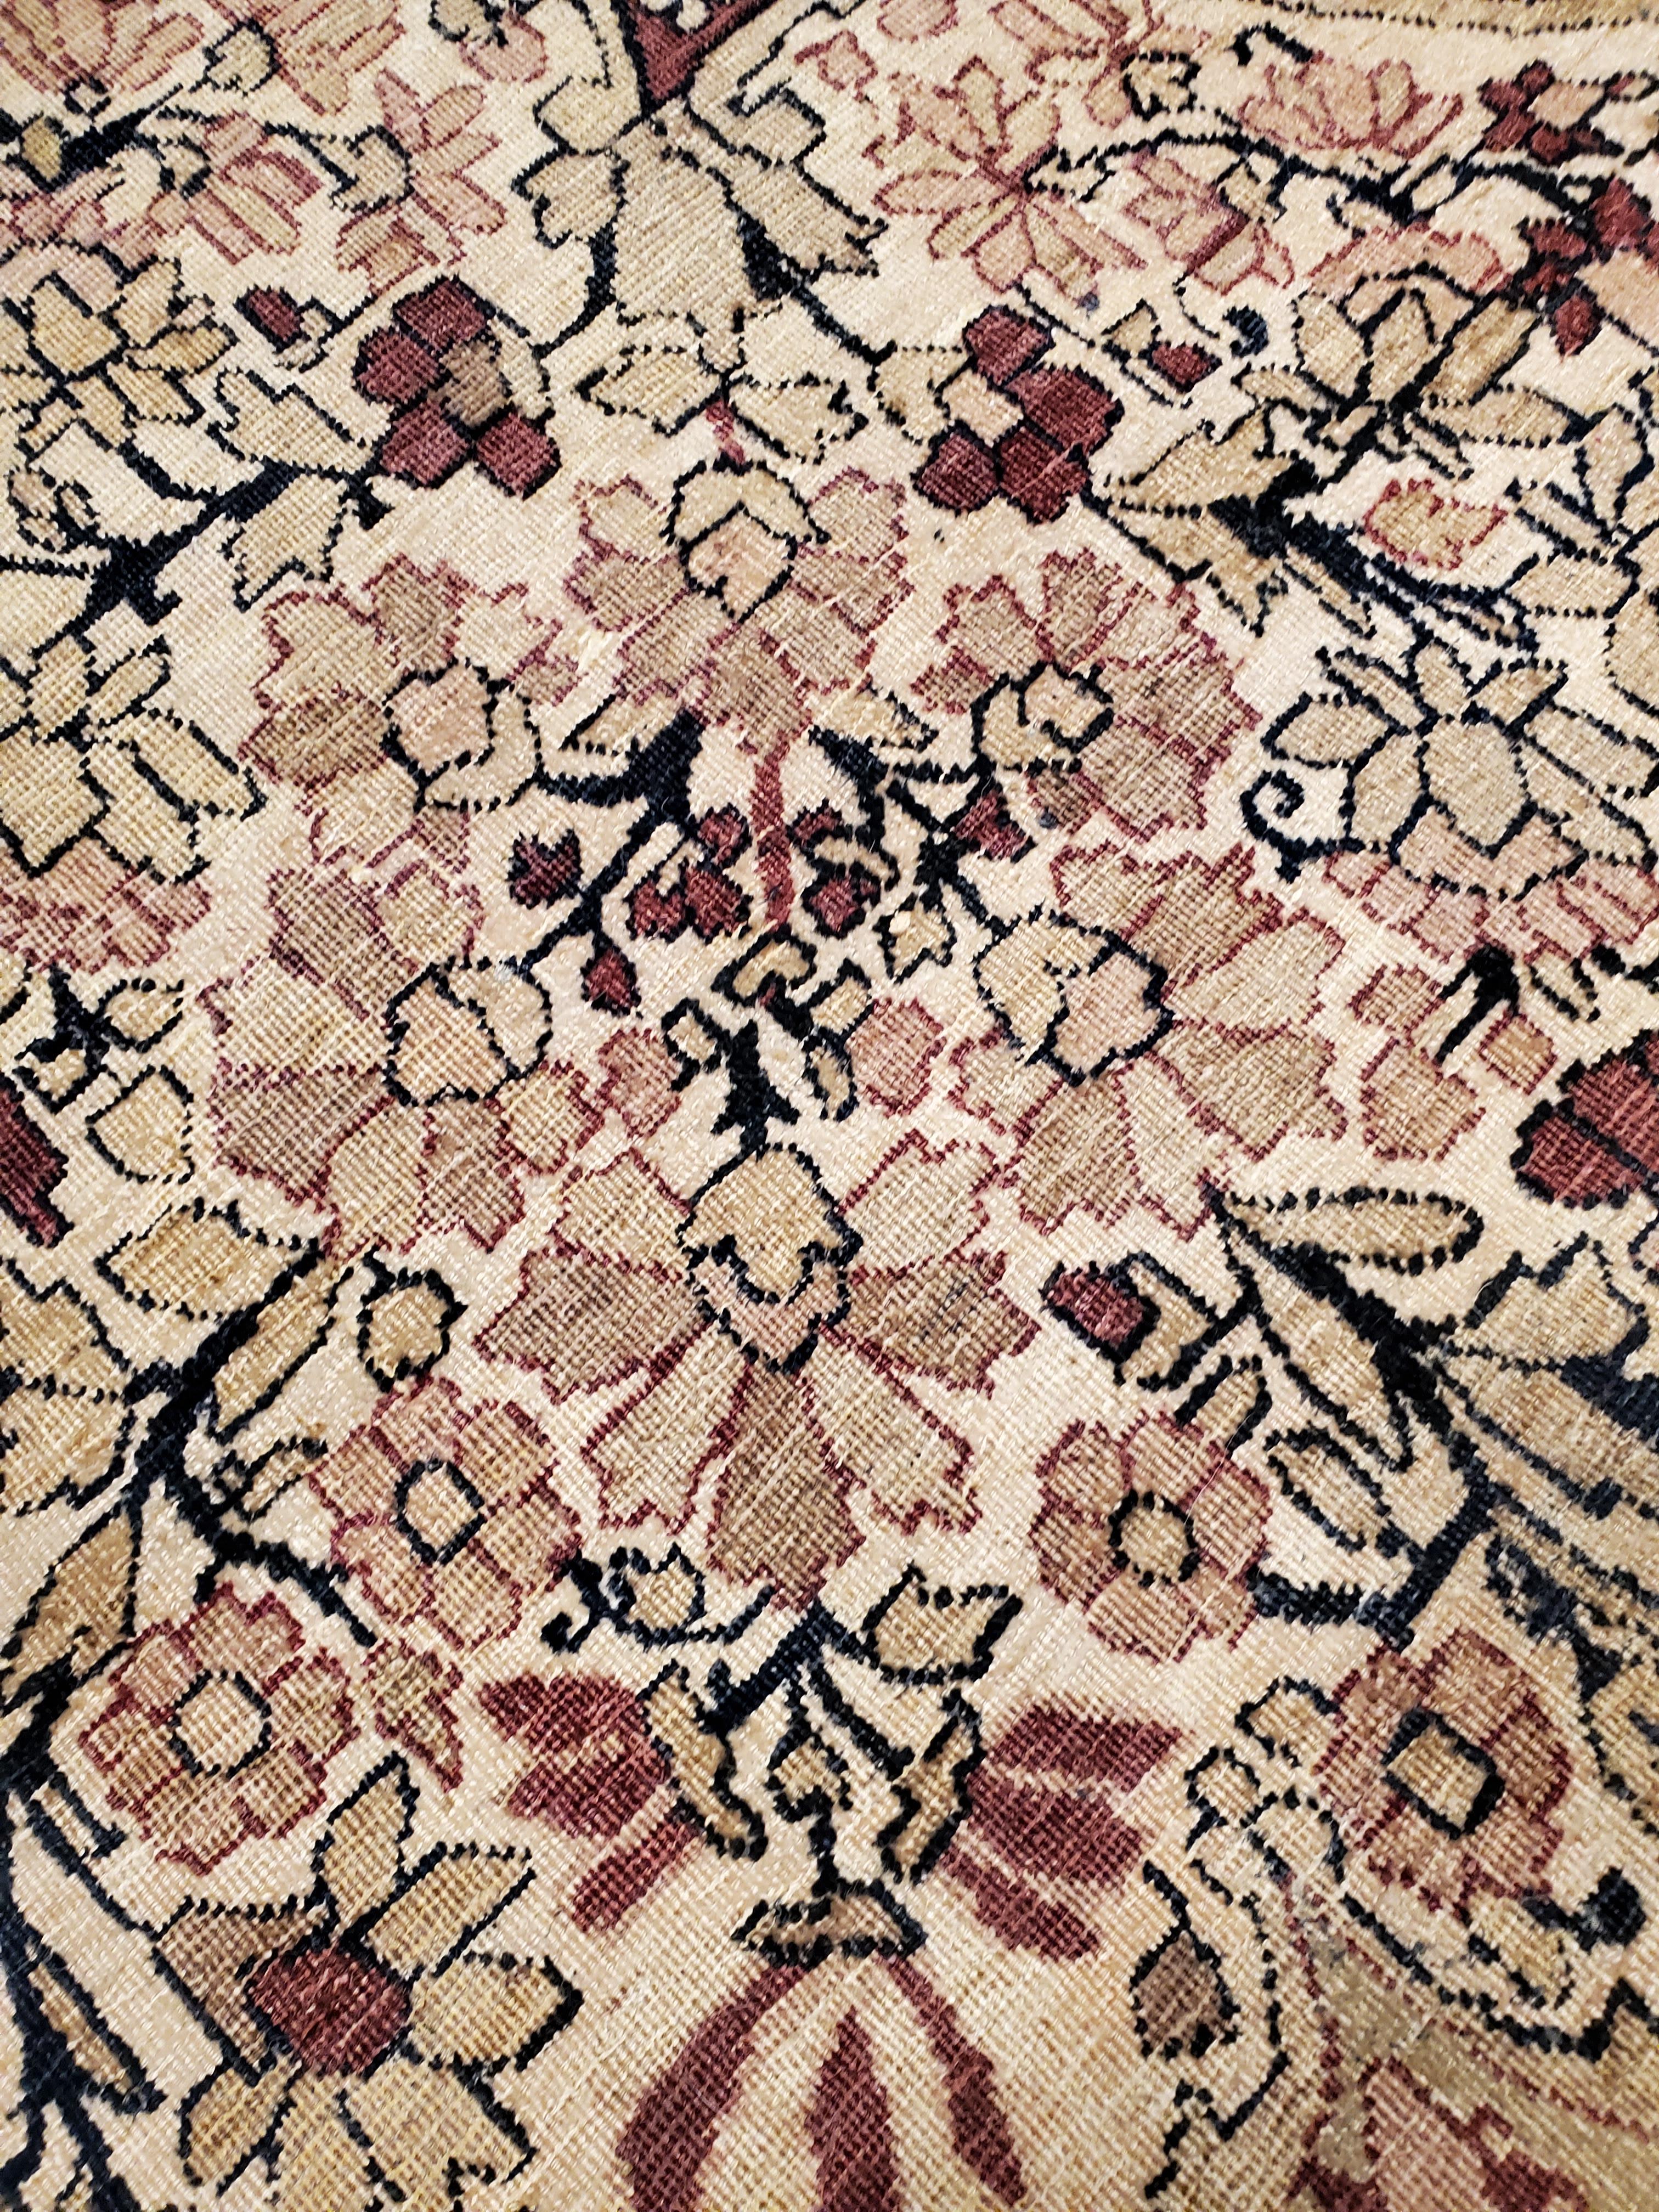 This master crafted Persian Laver Kerman carpet exemplifies the profound understanding of the artistic principles of balance and harmony that make art level antique rugs so inspiring to live with. Indicative of the best classical Persian carpets of